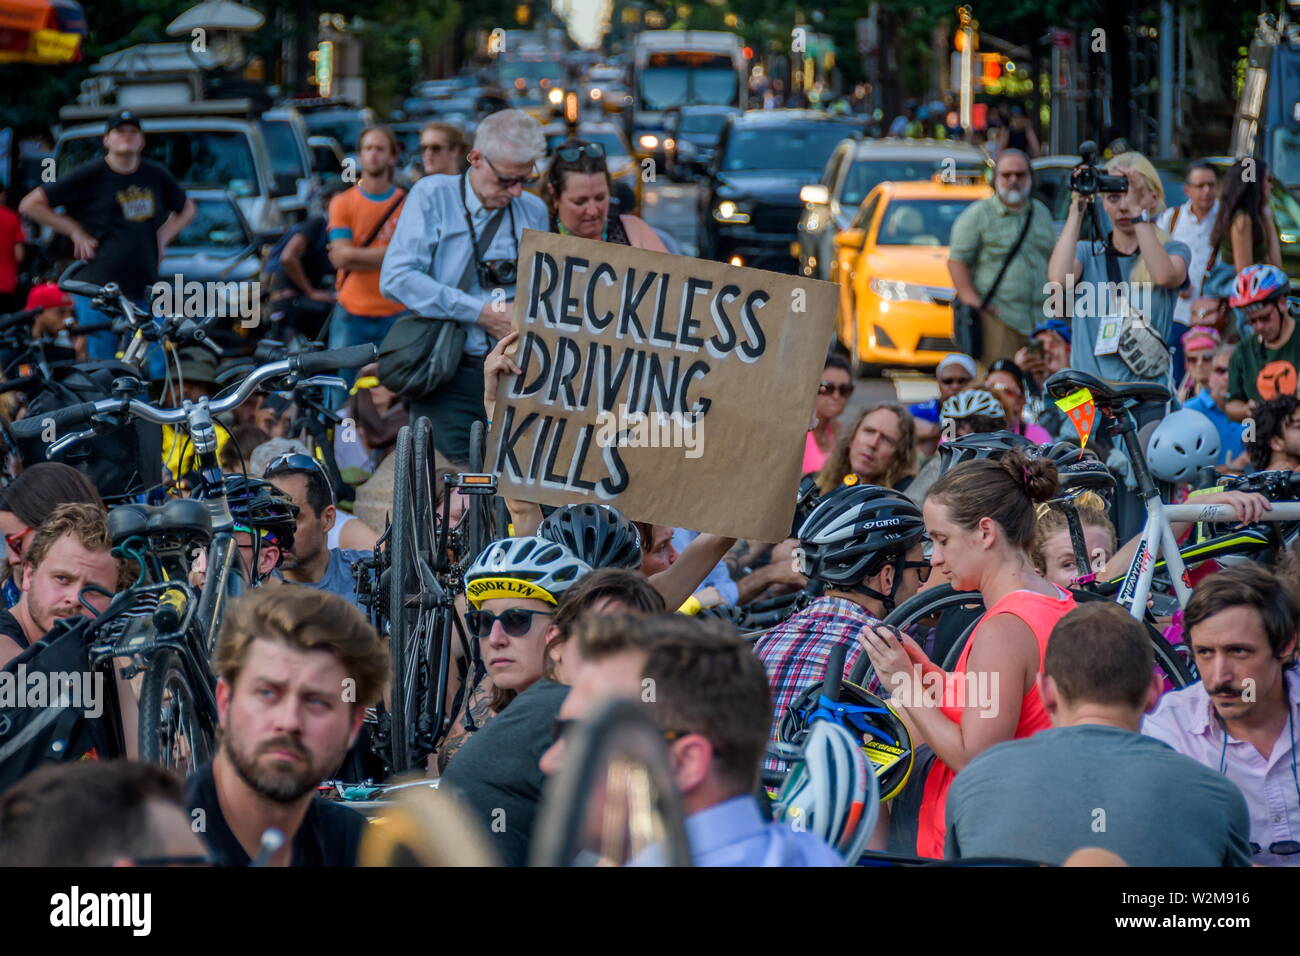 New York, USA. July 9, 2019, New York, New York, USA: Hundreds of New Yorkers who bike joined the NYC Bike Family, a coalition of over 15 bicycle advocacy groups at a mass die-in in Washington Square Park, a non-violent, peaceful memorial event to protest the killing of cyclists. Credit: Erik McGregor/ZUMA Wire/Alamy Live News Stock Photo